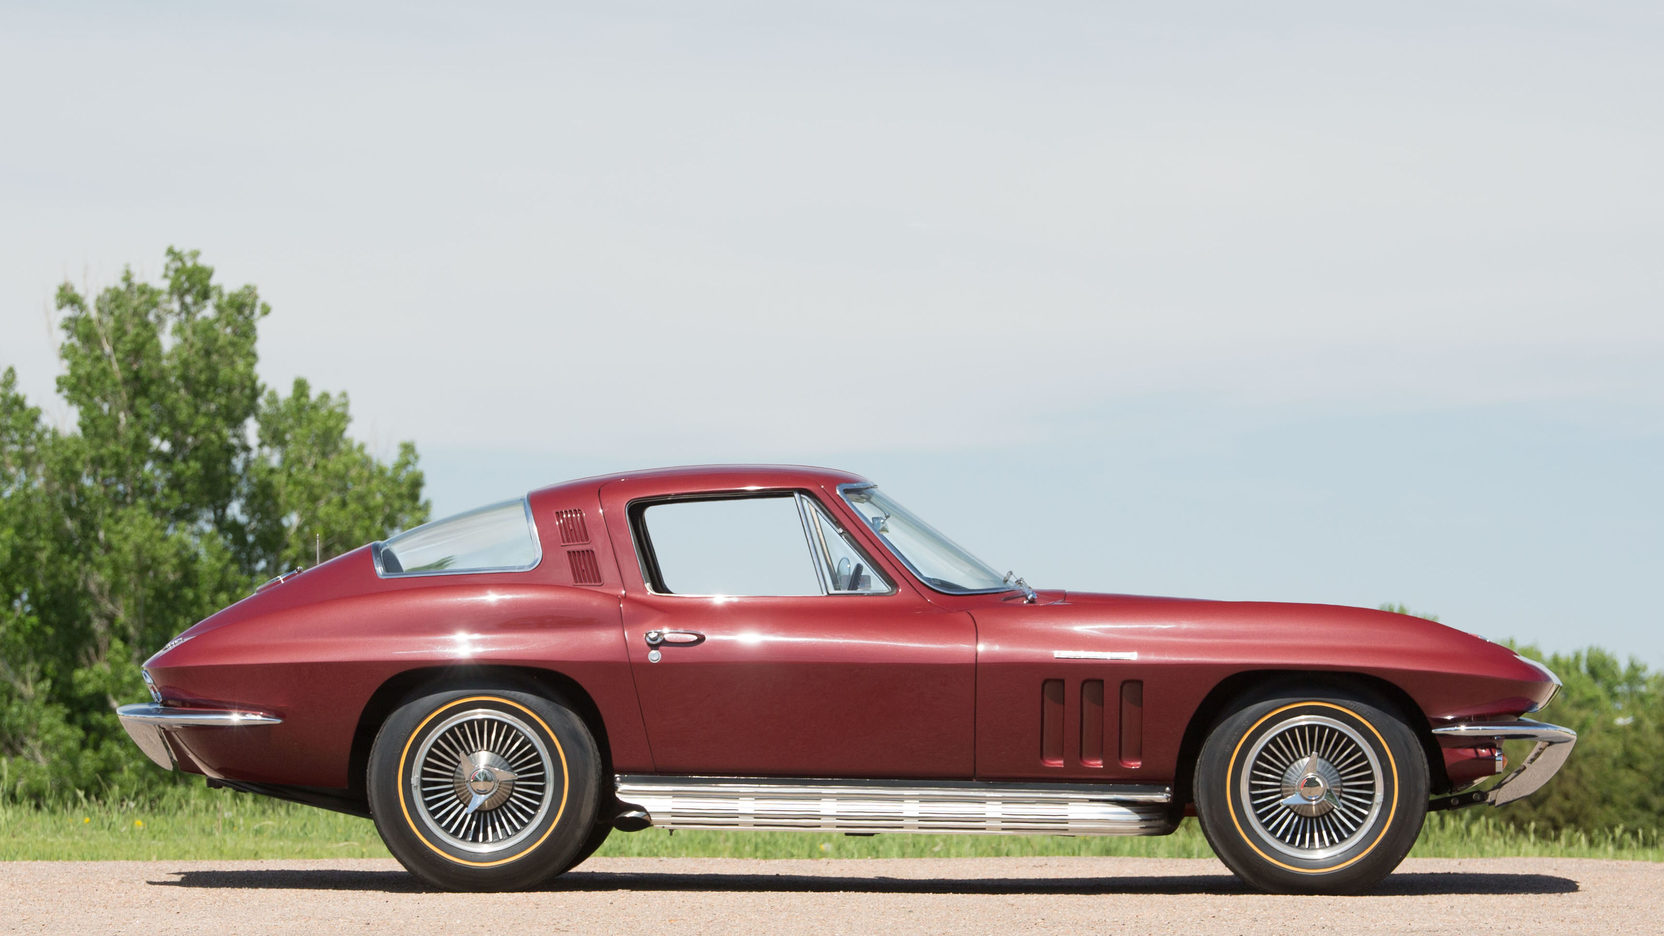 The 1965 Chevrolet Corvette Sting Ray had disc brakes on all four wheels.